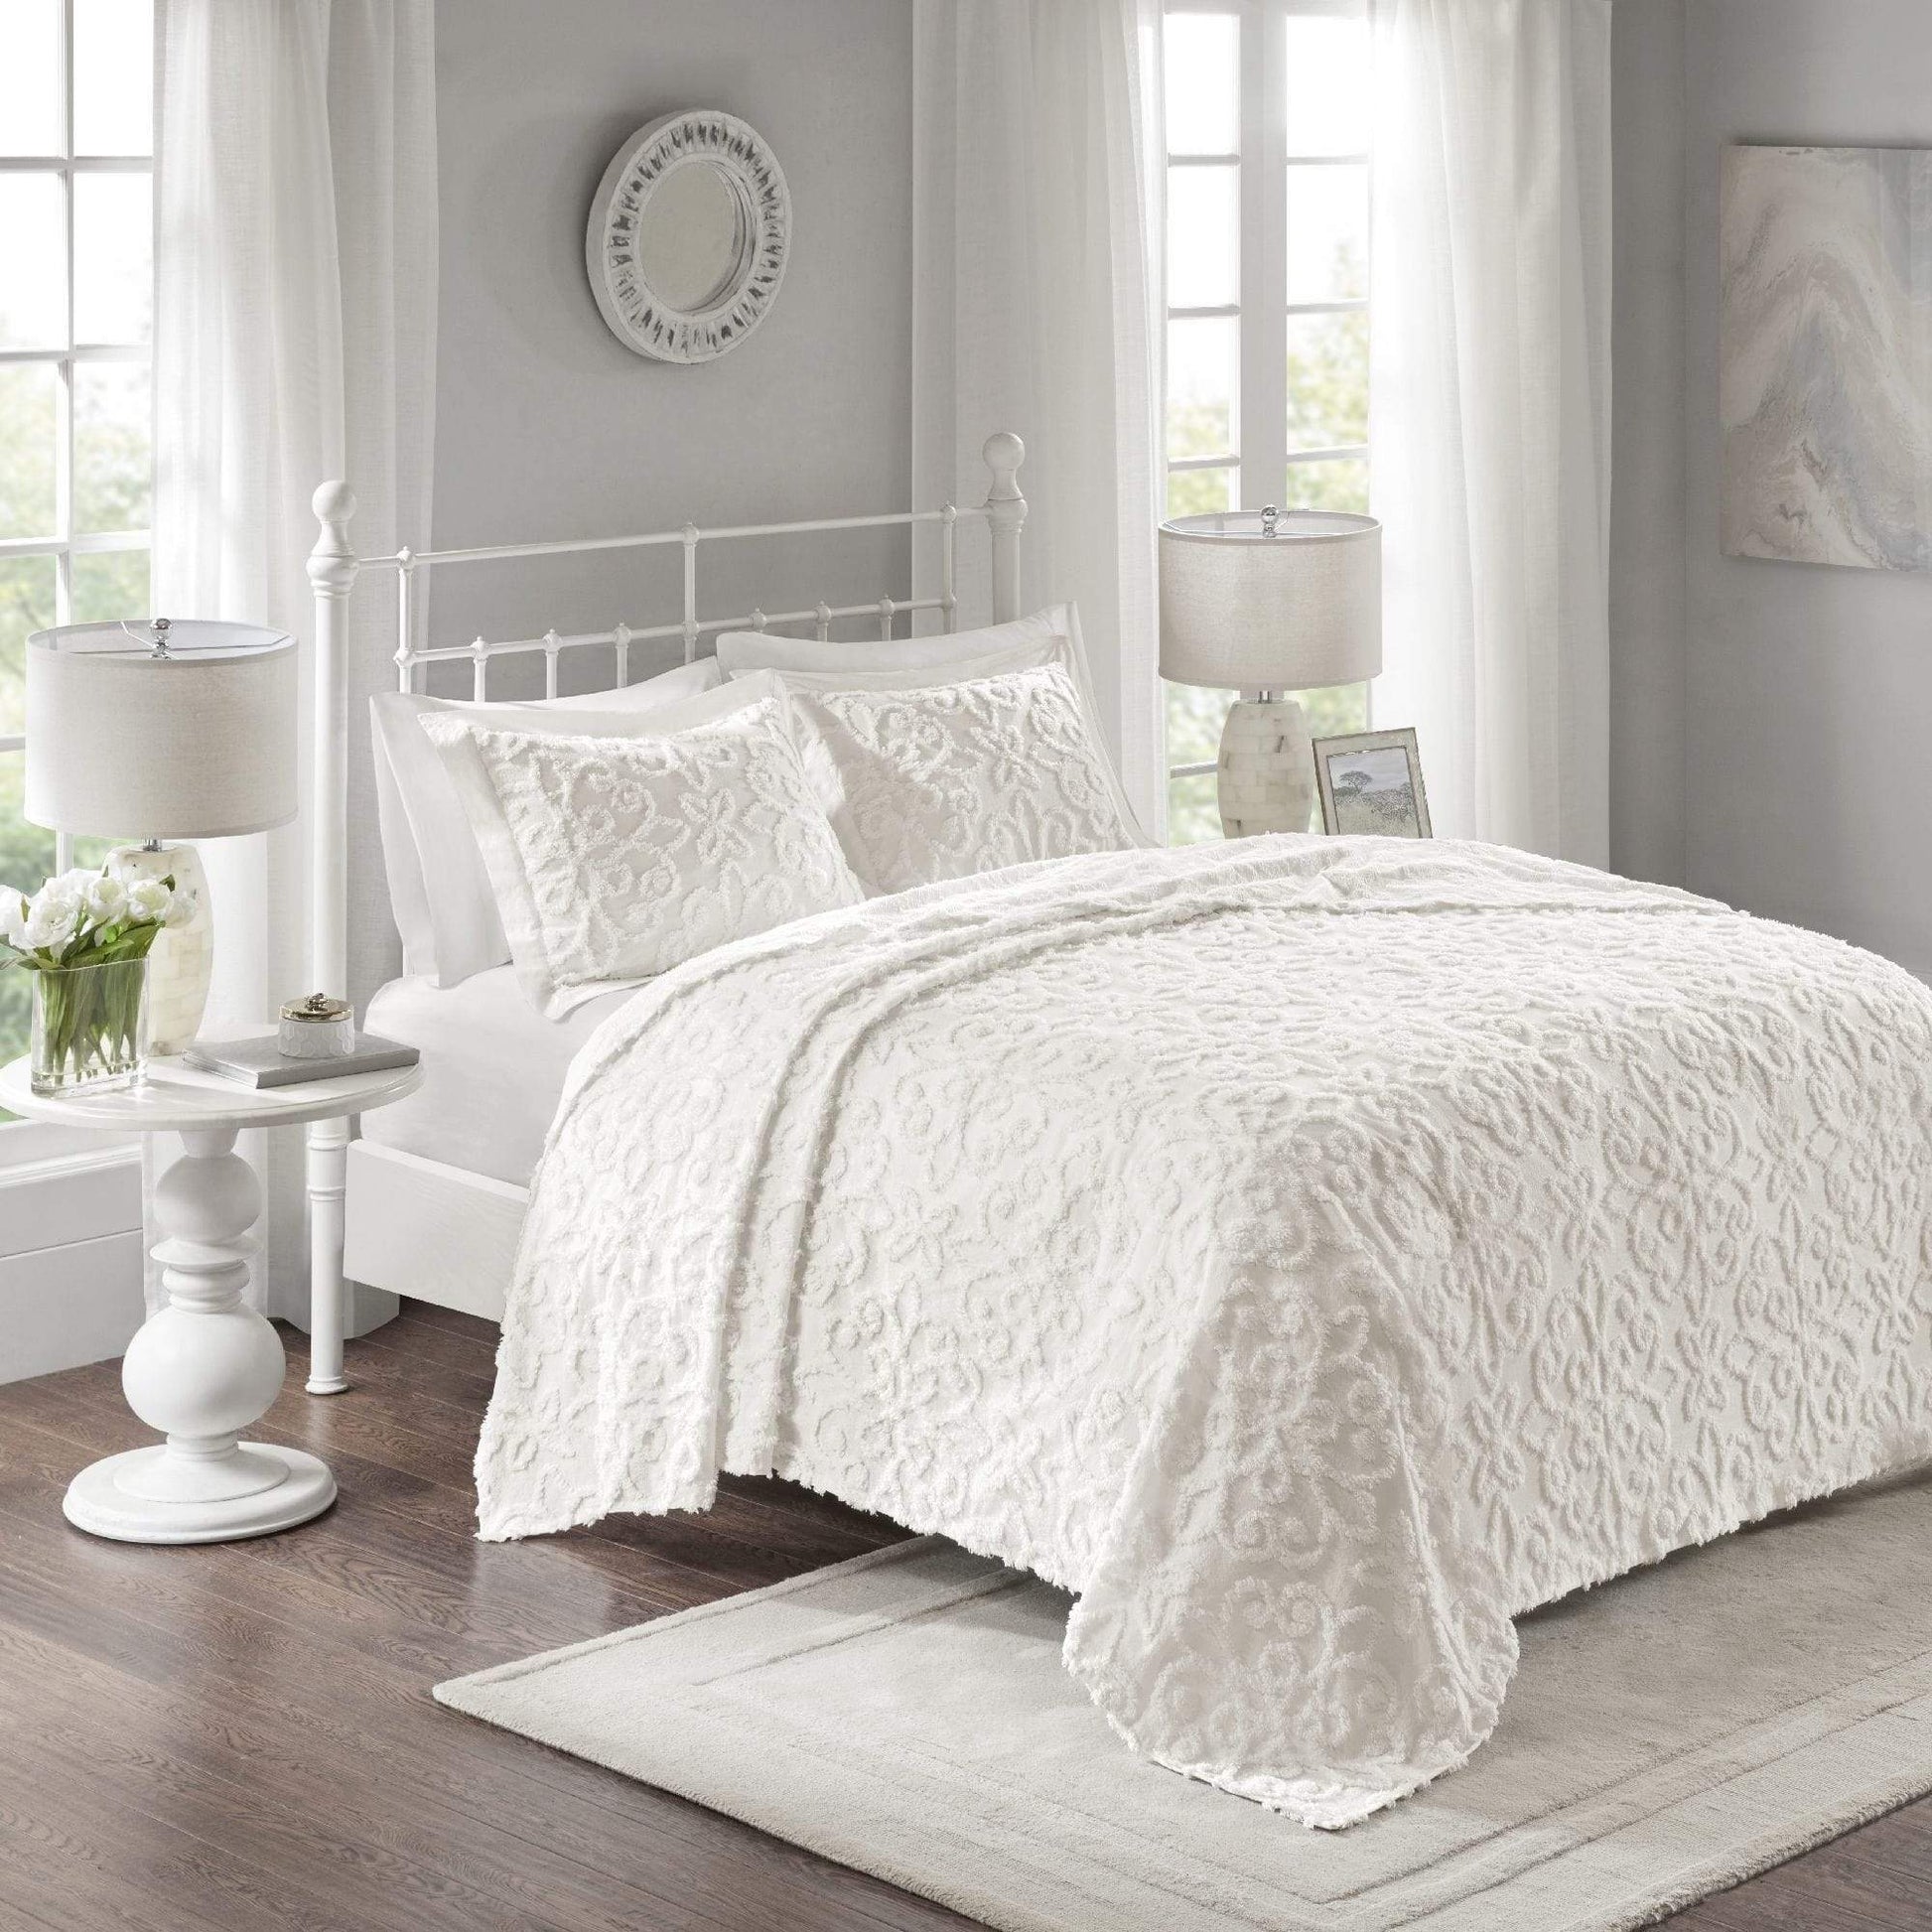 Cannon Bed & Bath Full/Queen / White Cannon - Full Queen White Bedspread